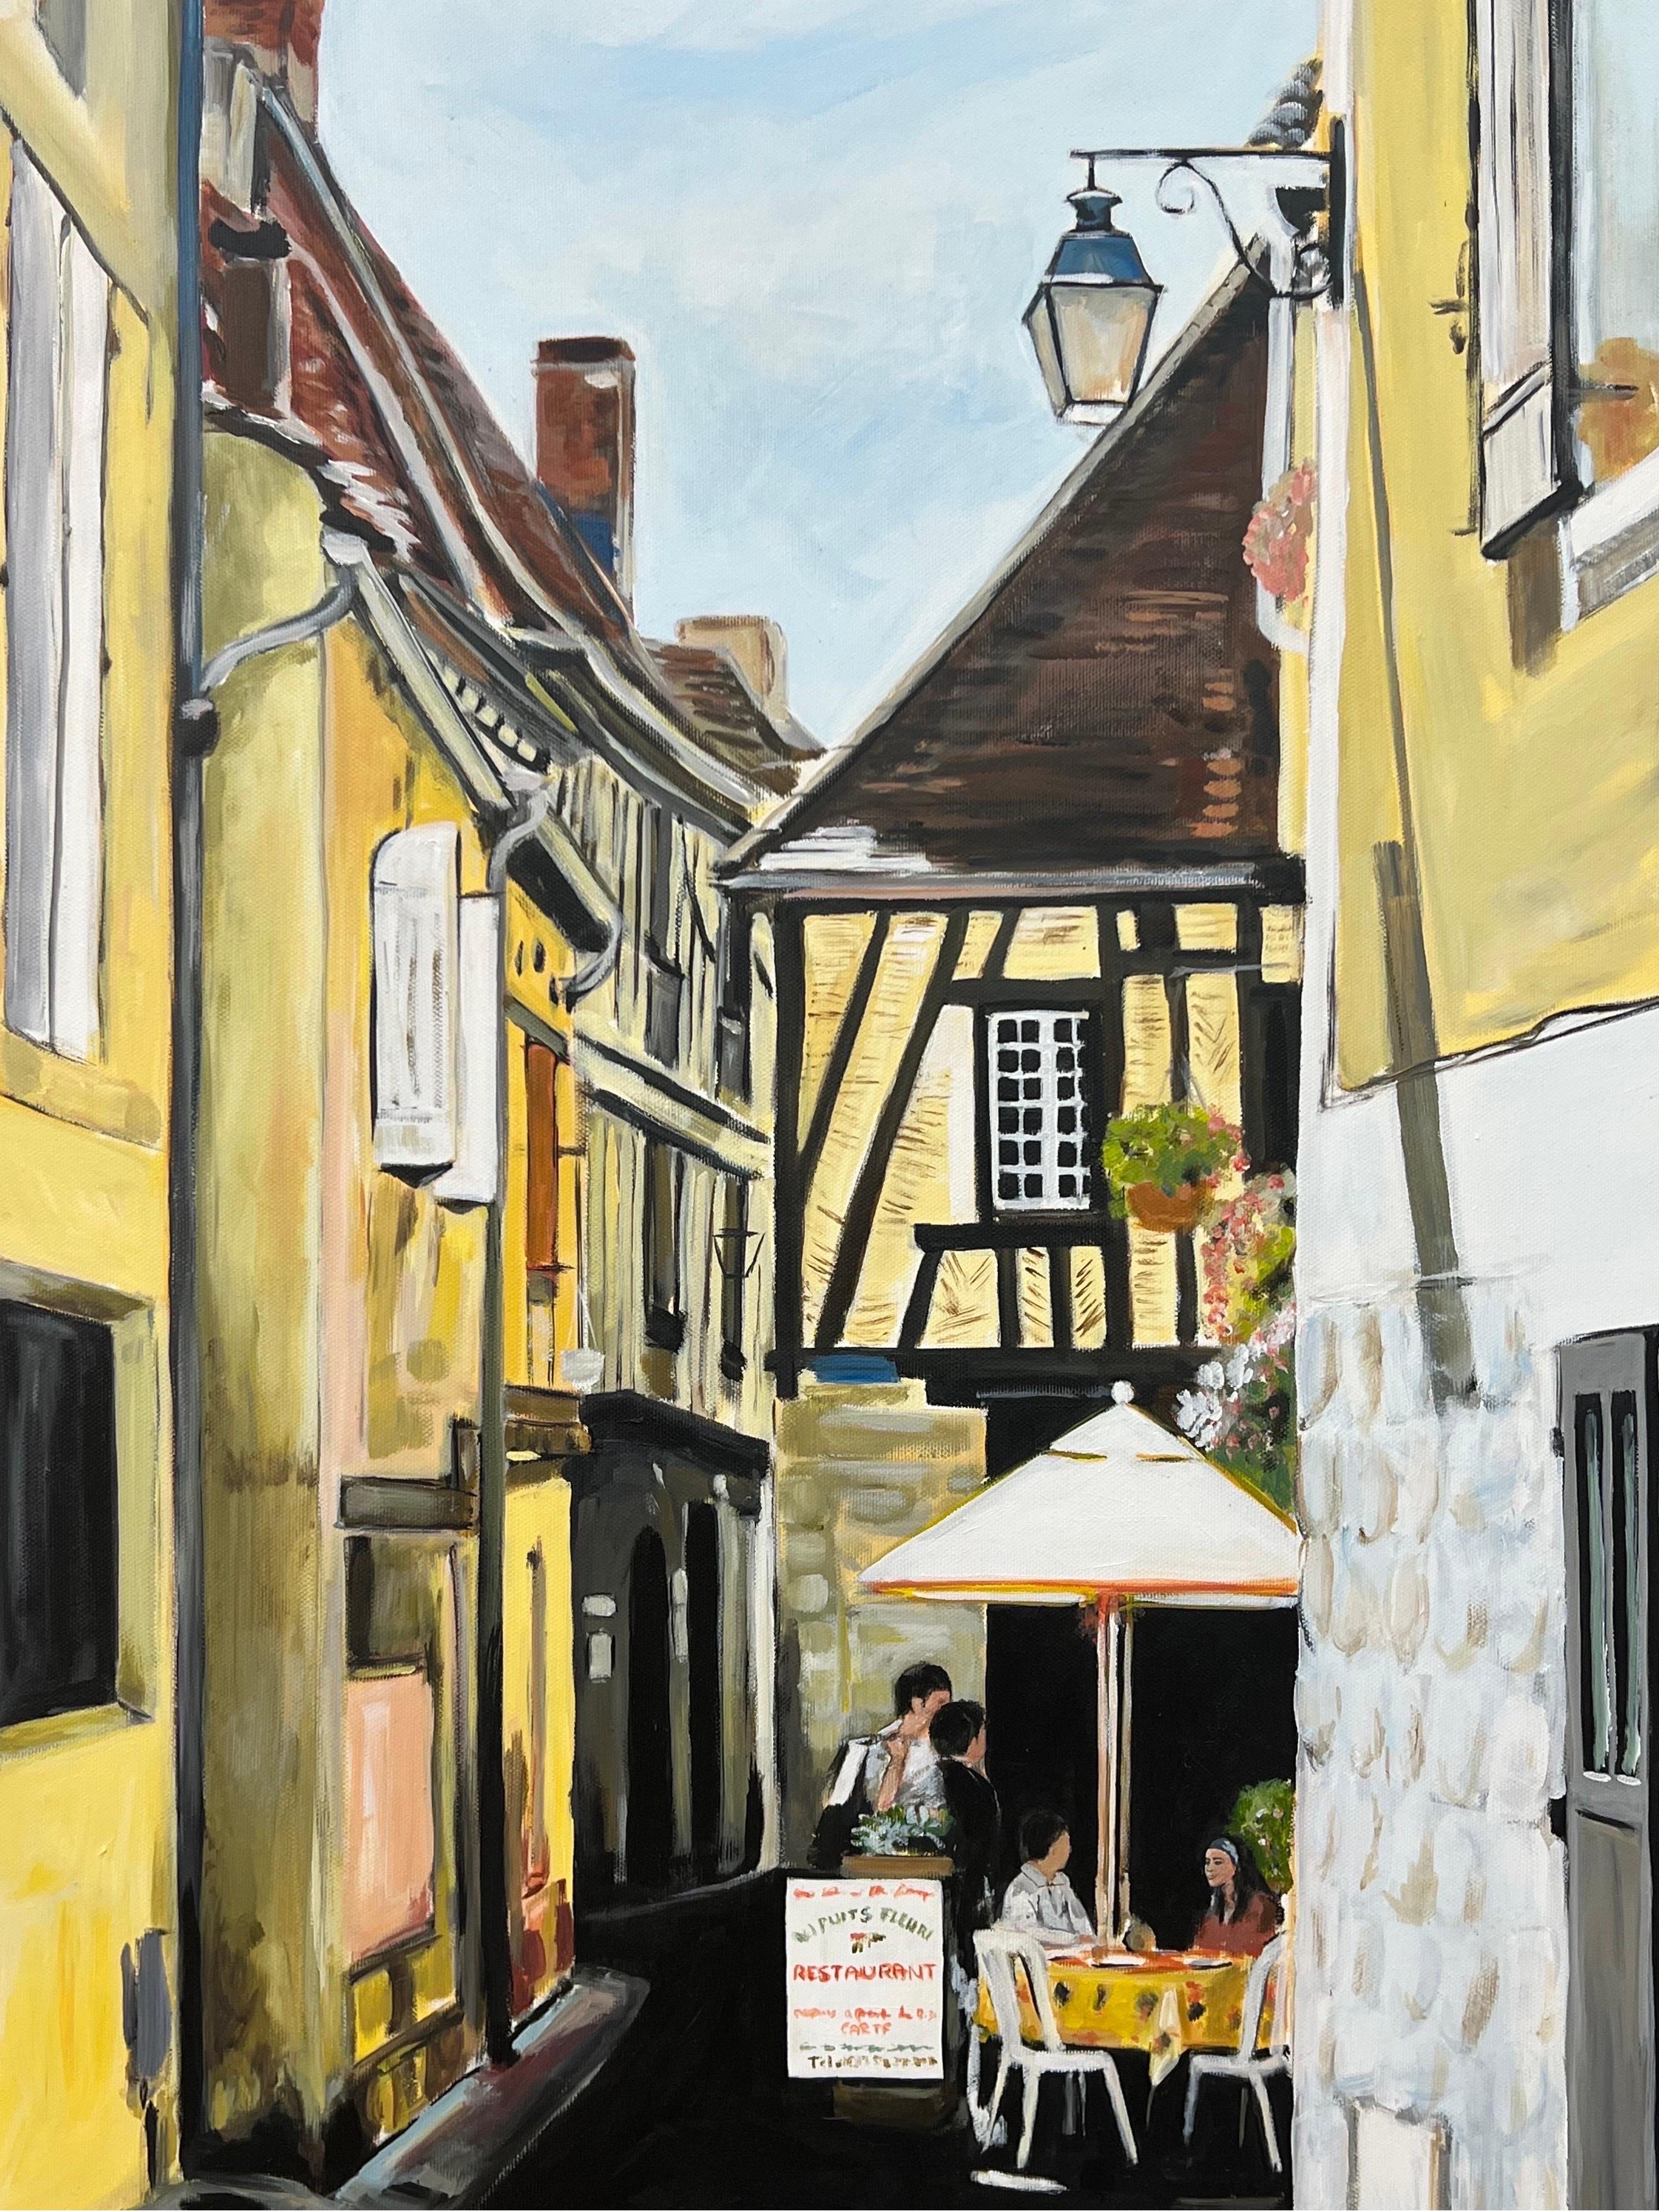 Original Painting of Bergerac Cafe in France by Contemporary British Artist, Angela Wakefield. Part of her European Series published in 2012 (No.10). The beautiful old town of Bergerac in south west France is known for its half-timbered buildings